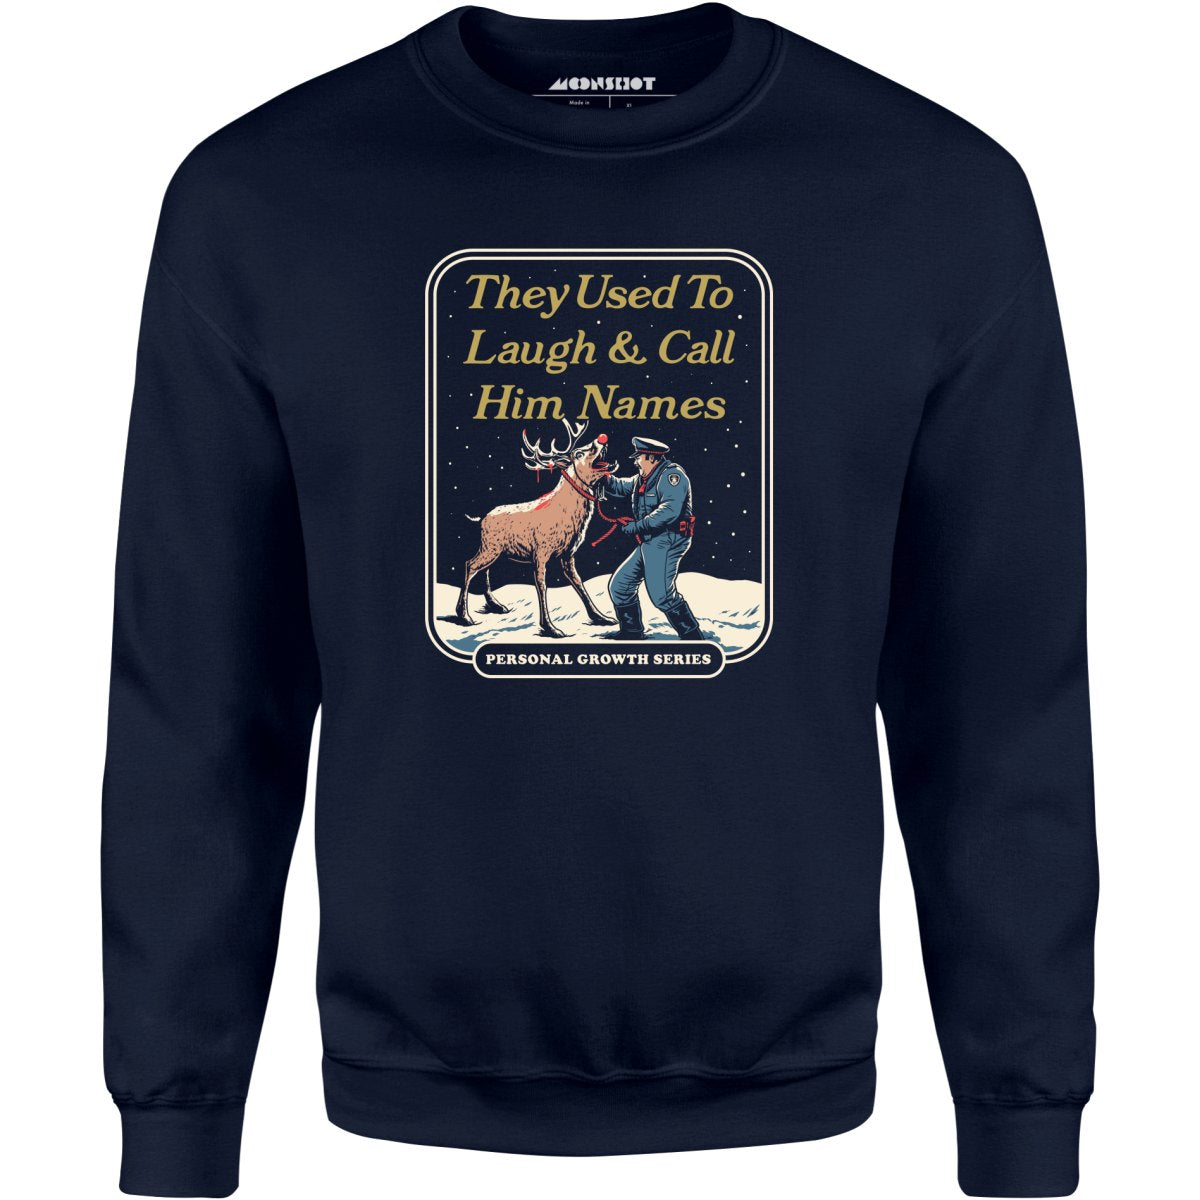 They Used to Laugh and Call Him Names - Unisex Sweatshirt